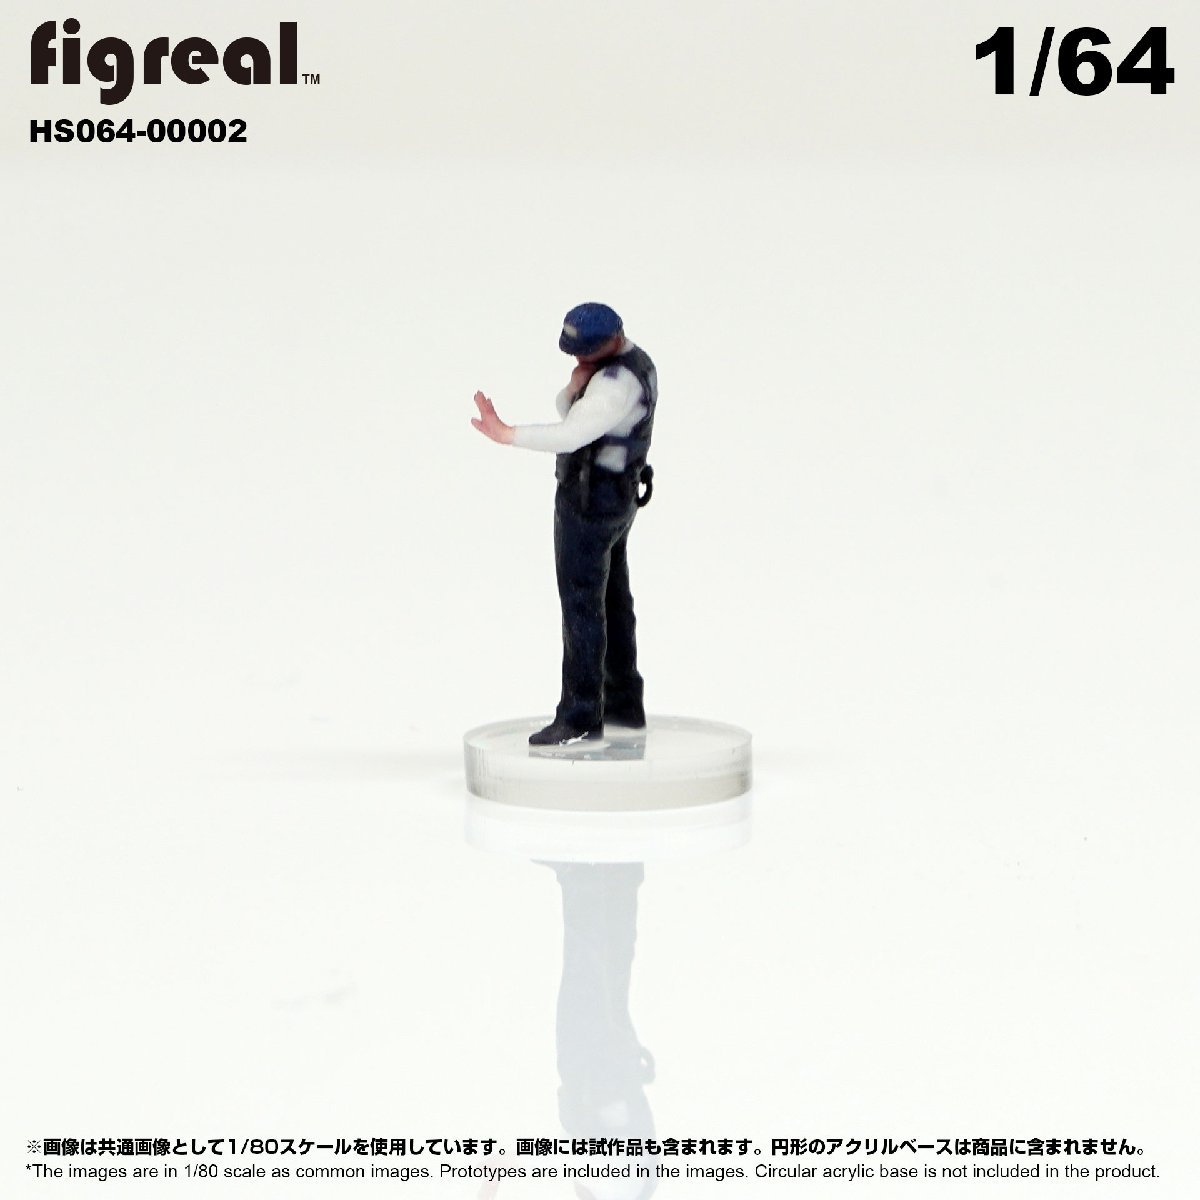 HS064-00002 figreal 日本警察官 1/64 高精細フィギュア